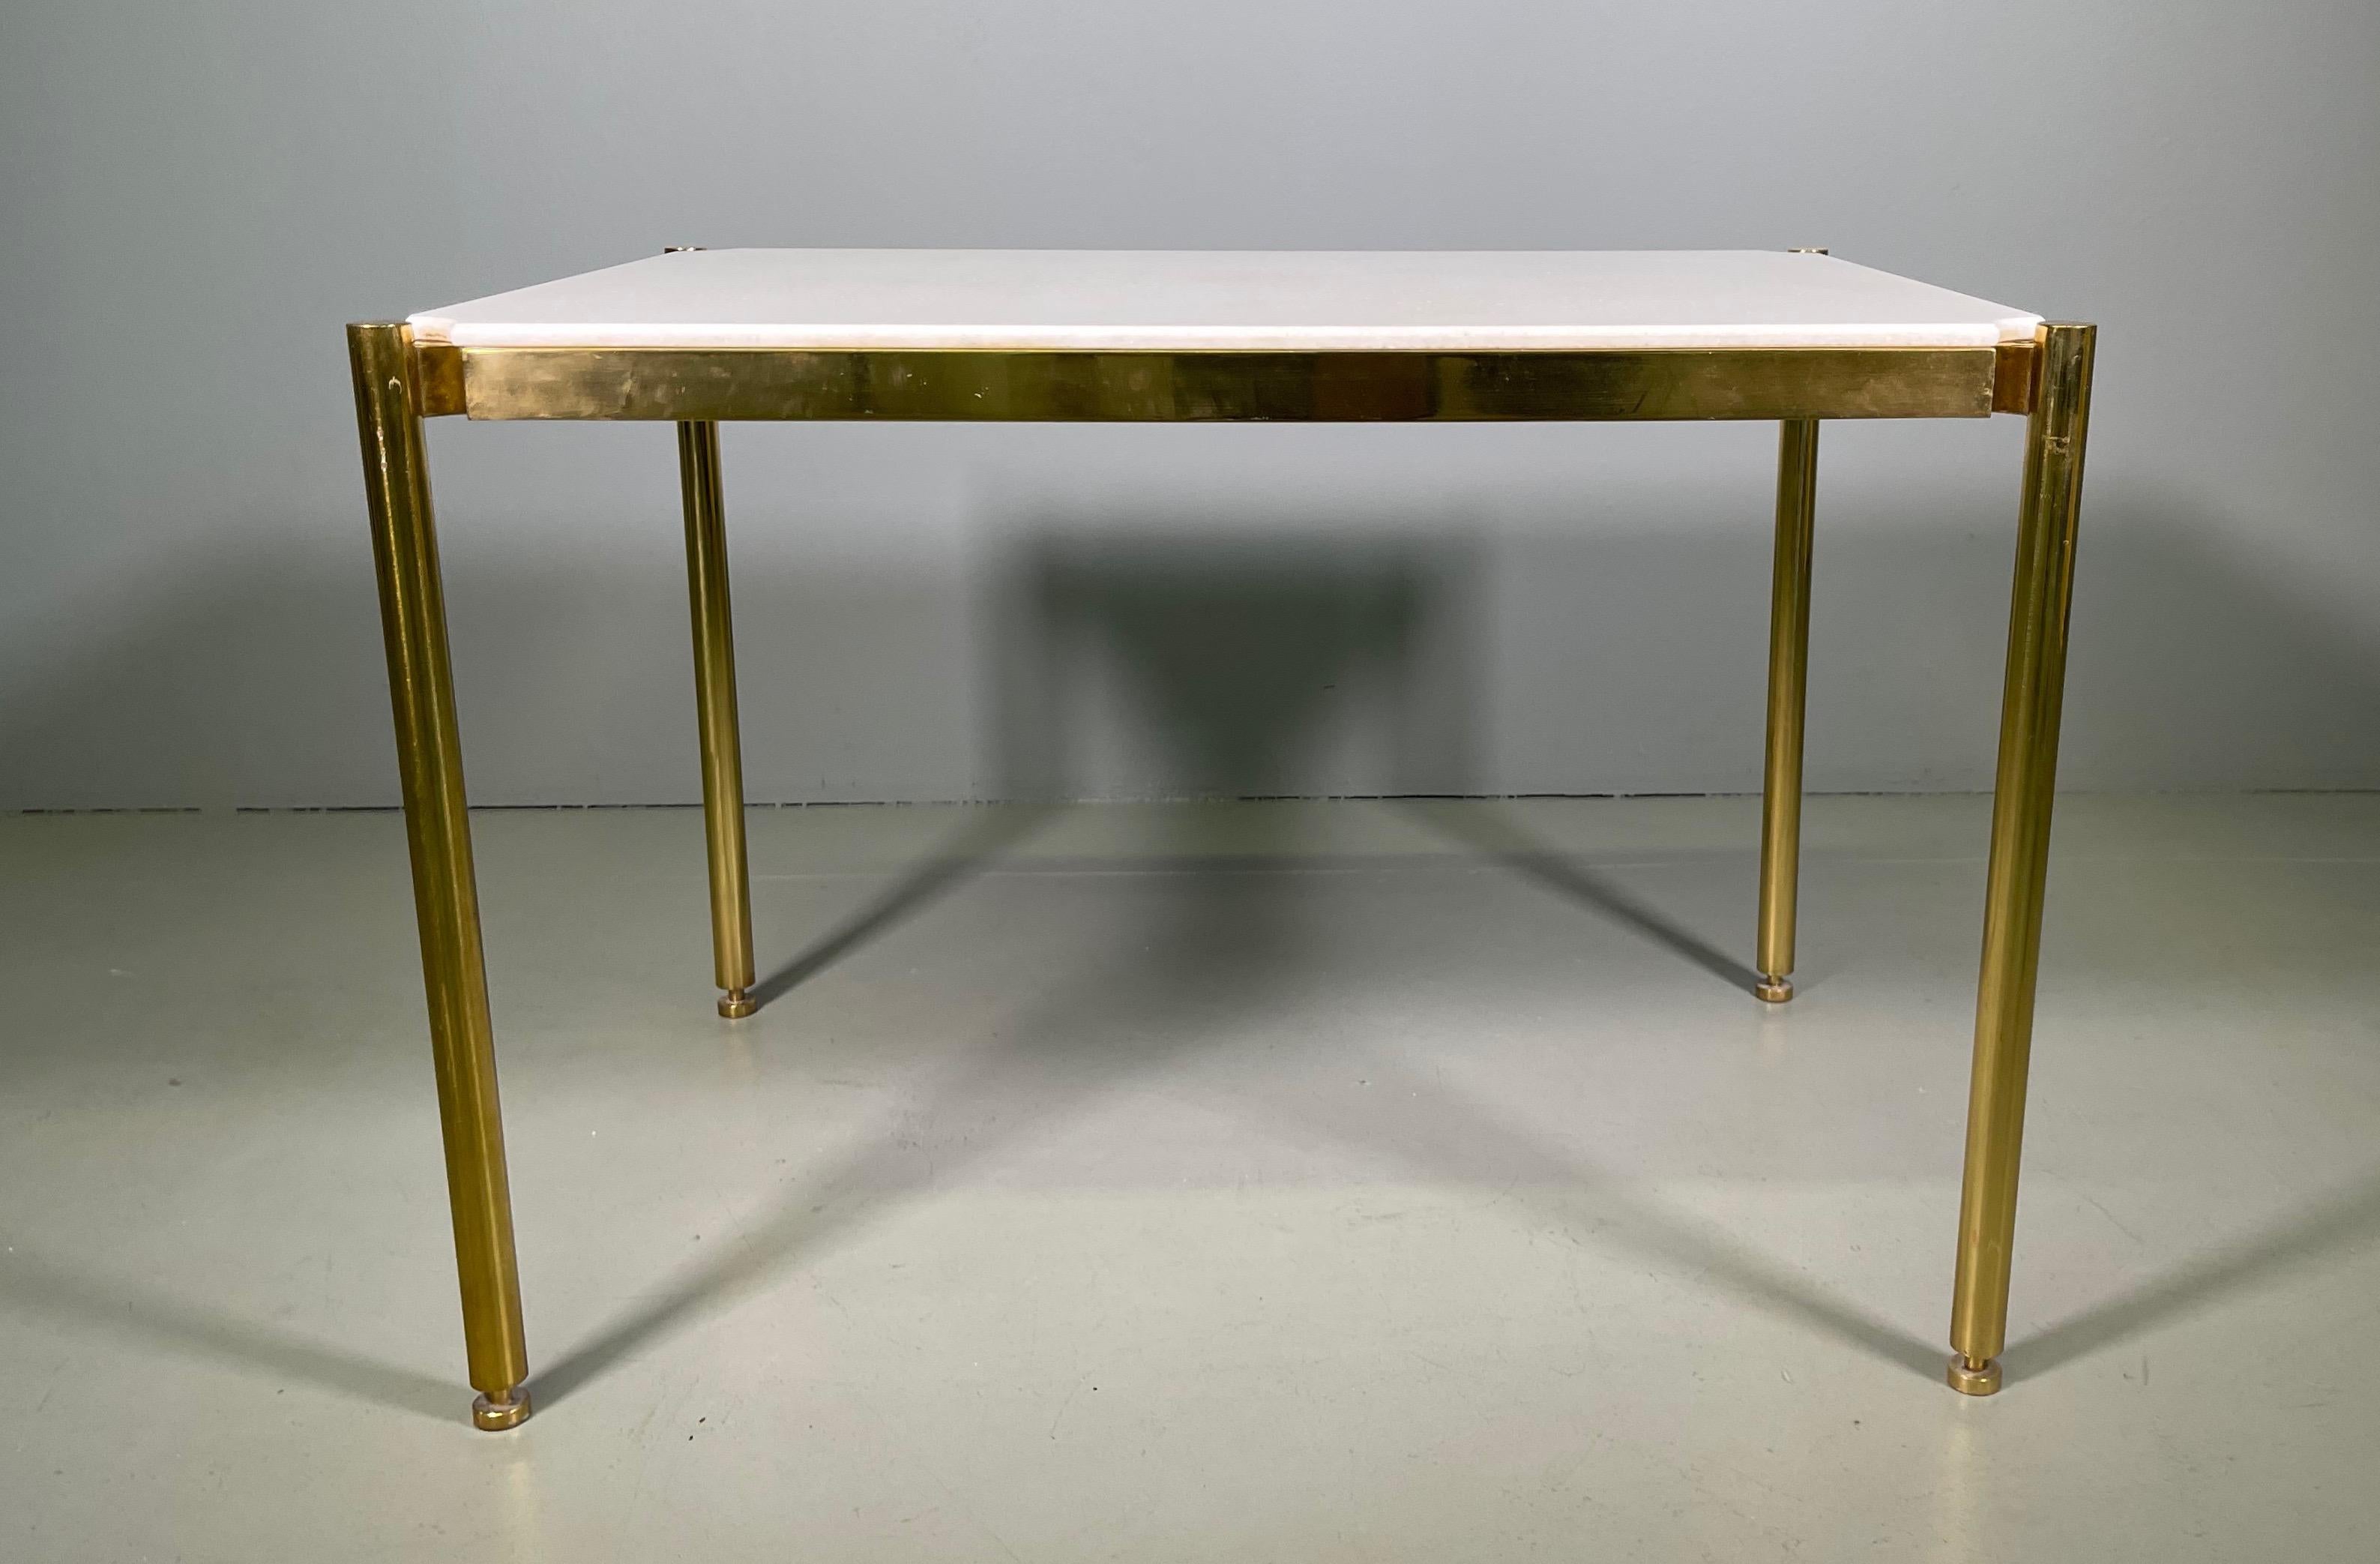 20th century Osvaldo Borsani low table in brass and rare sivec marble for Tecno.